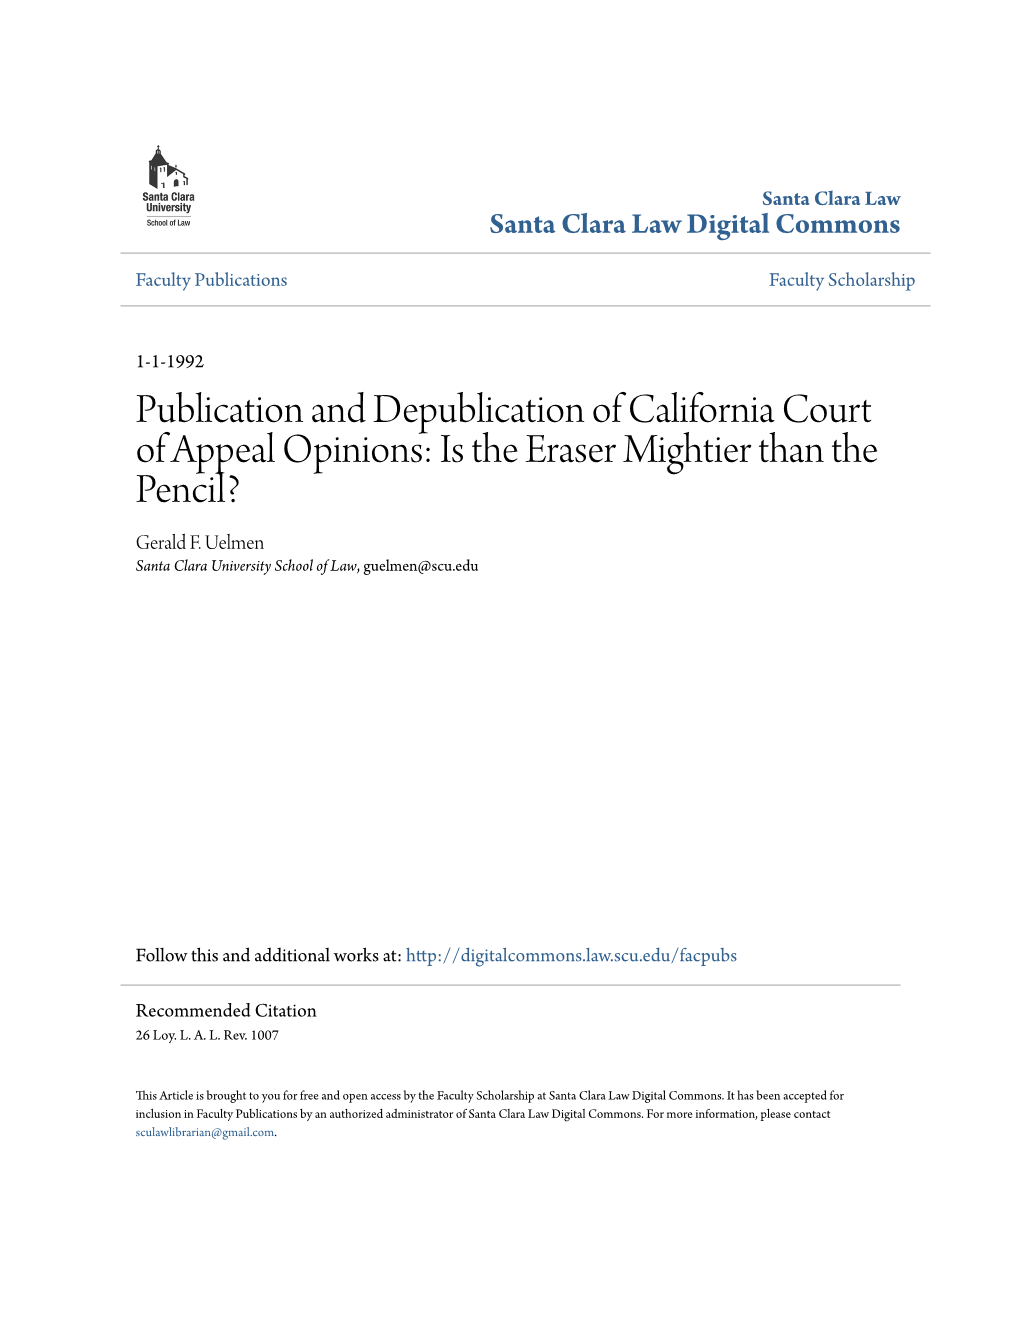 Publication and Depublication of California Court of Appeal Opinions: Is the Eraser Mightier Than the Pencil? Gerald F